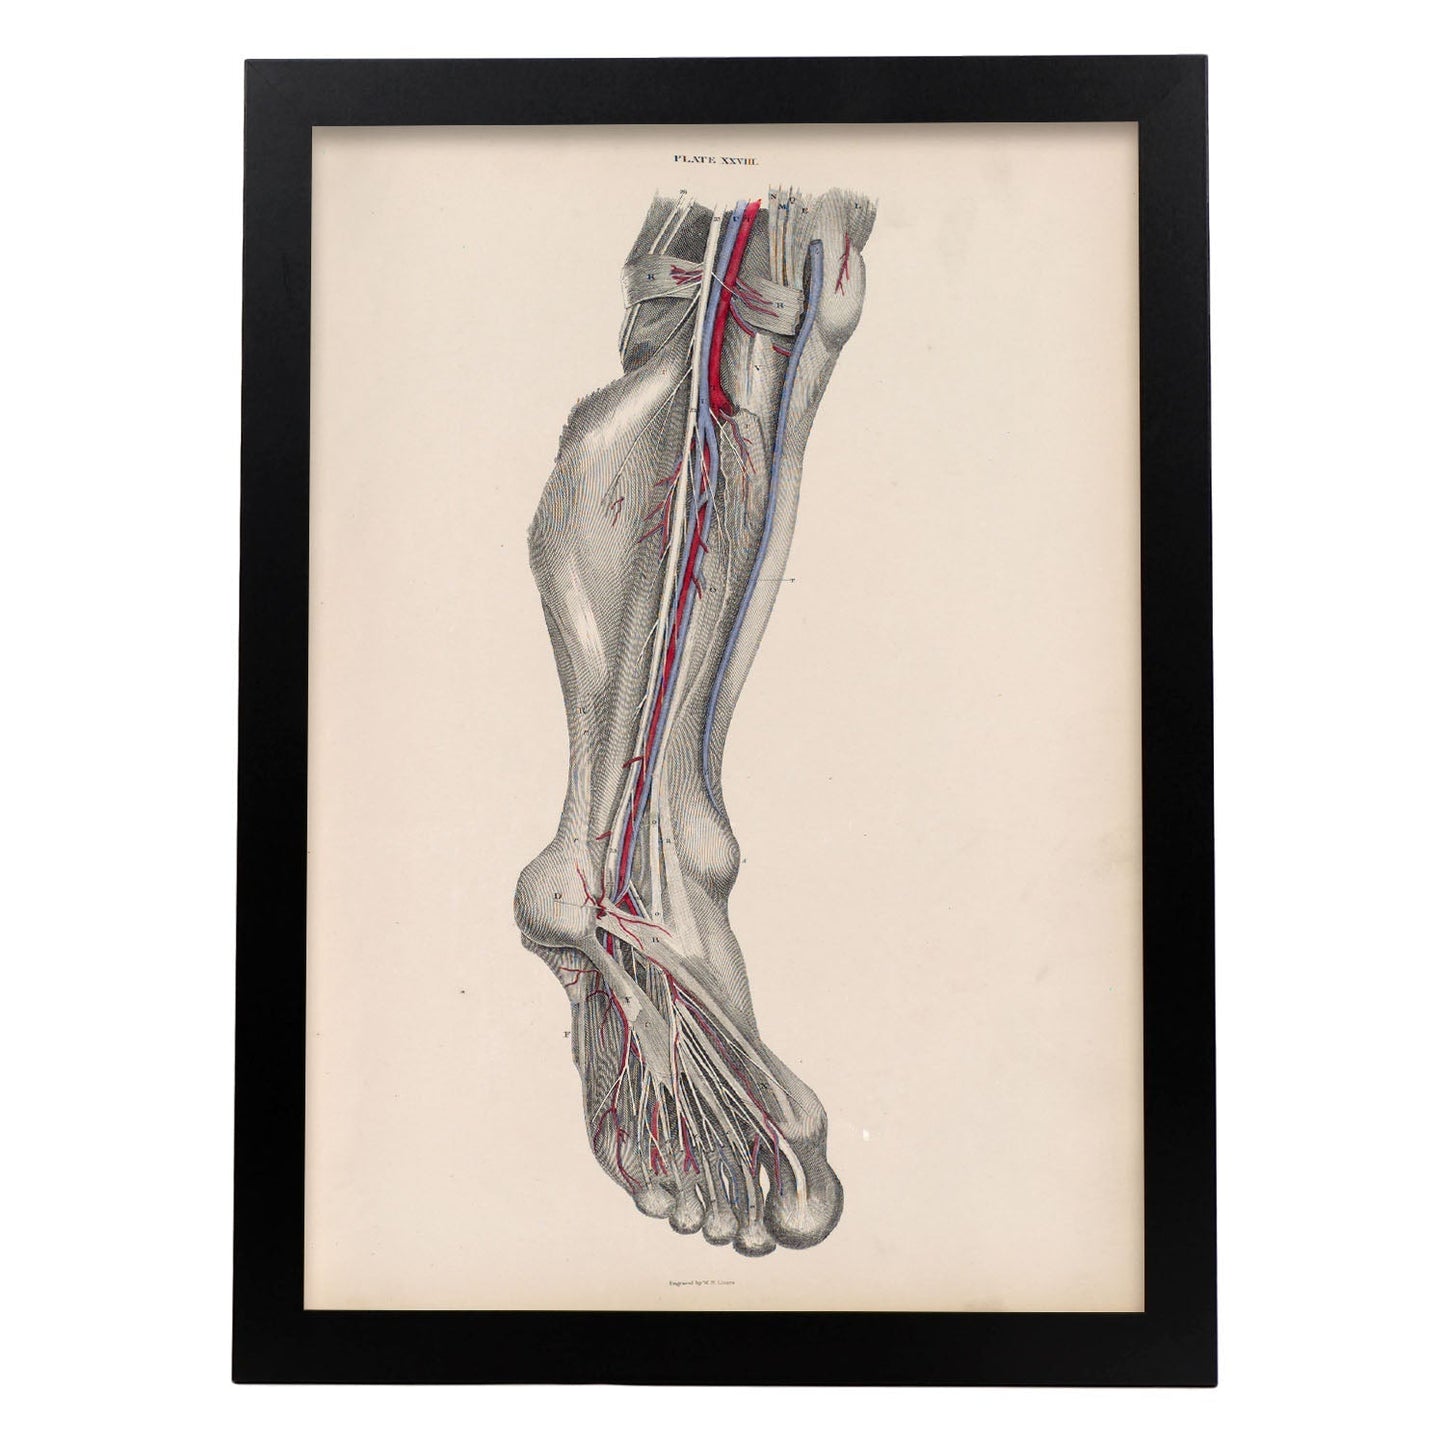 Dissection of the lower leg and foot-Artwork-Nacnic-A3-Sin marco-Nacnic Estudio SL